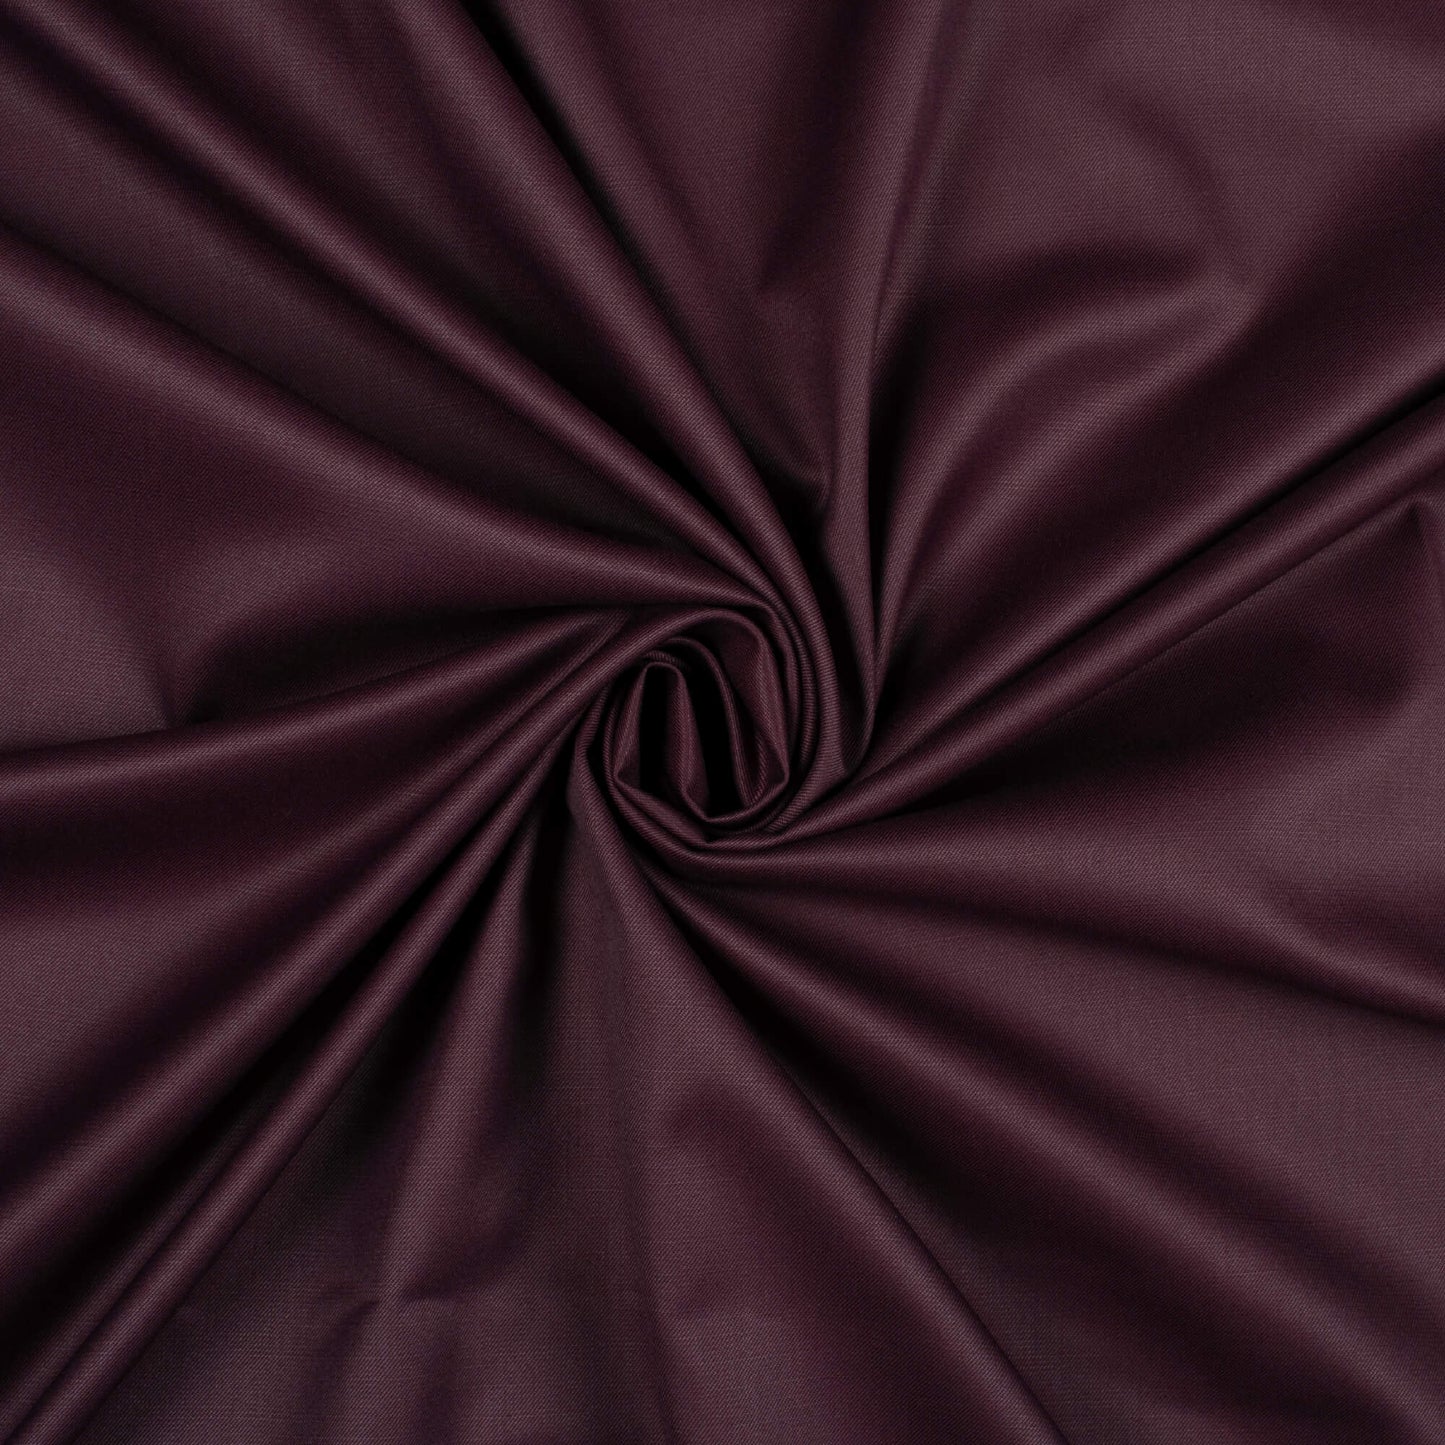 Maroon Plain Luxury Suiting Fabric (Width 58 Inches)